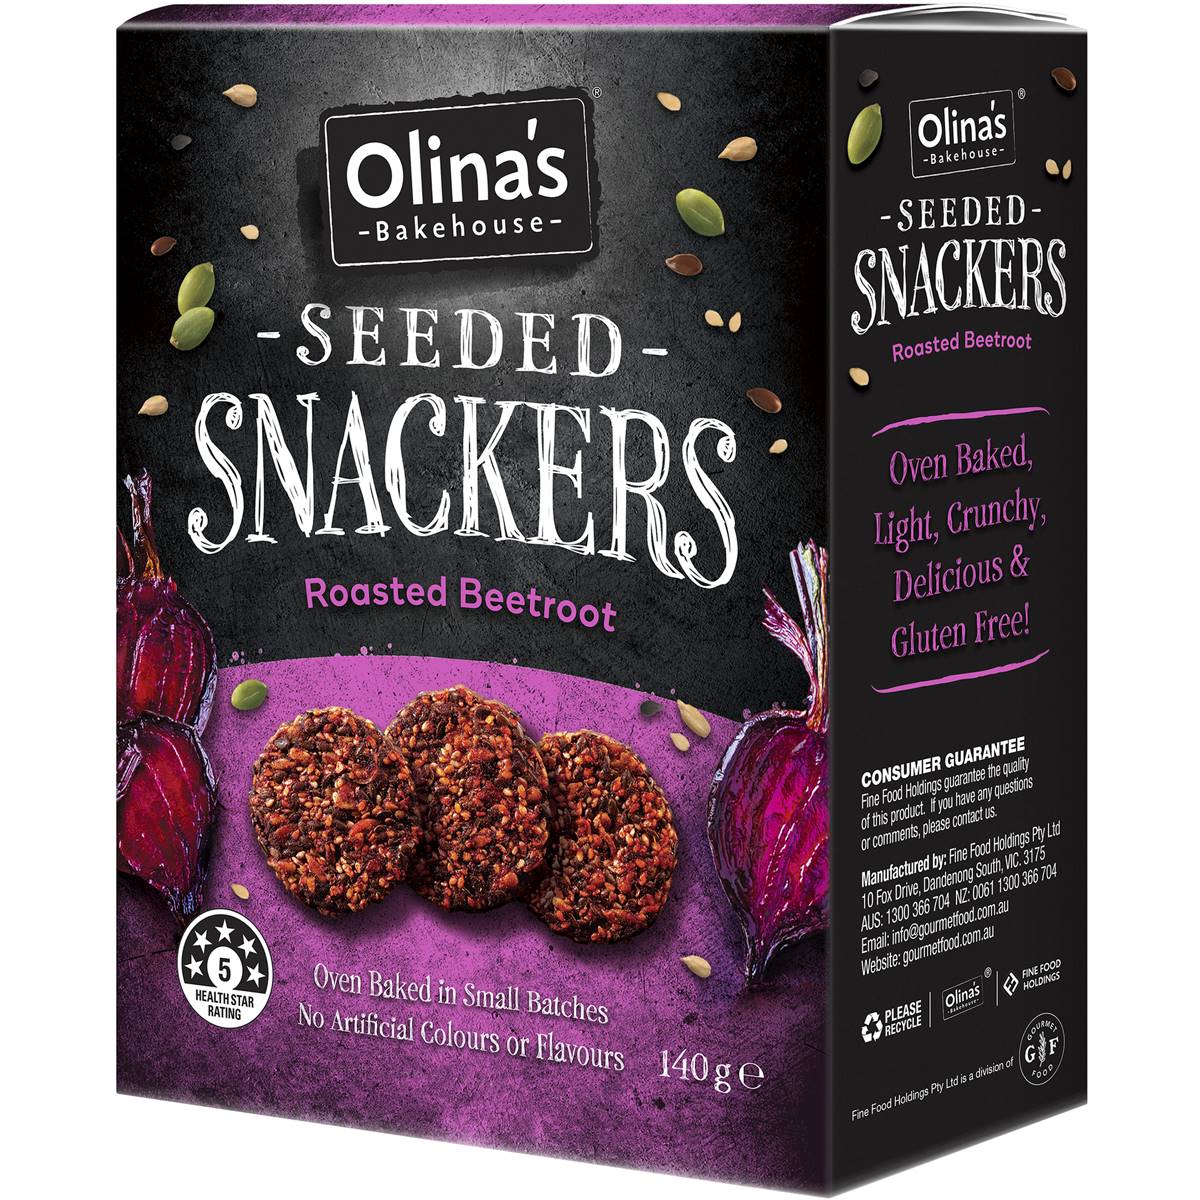 Olina's Seeded Snackers Roasted Beetroot 140g